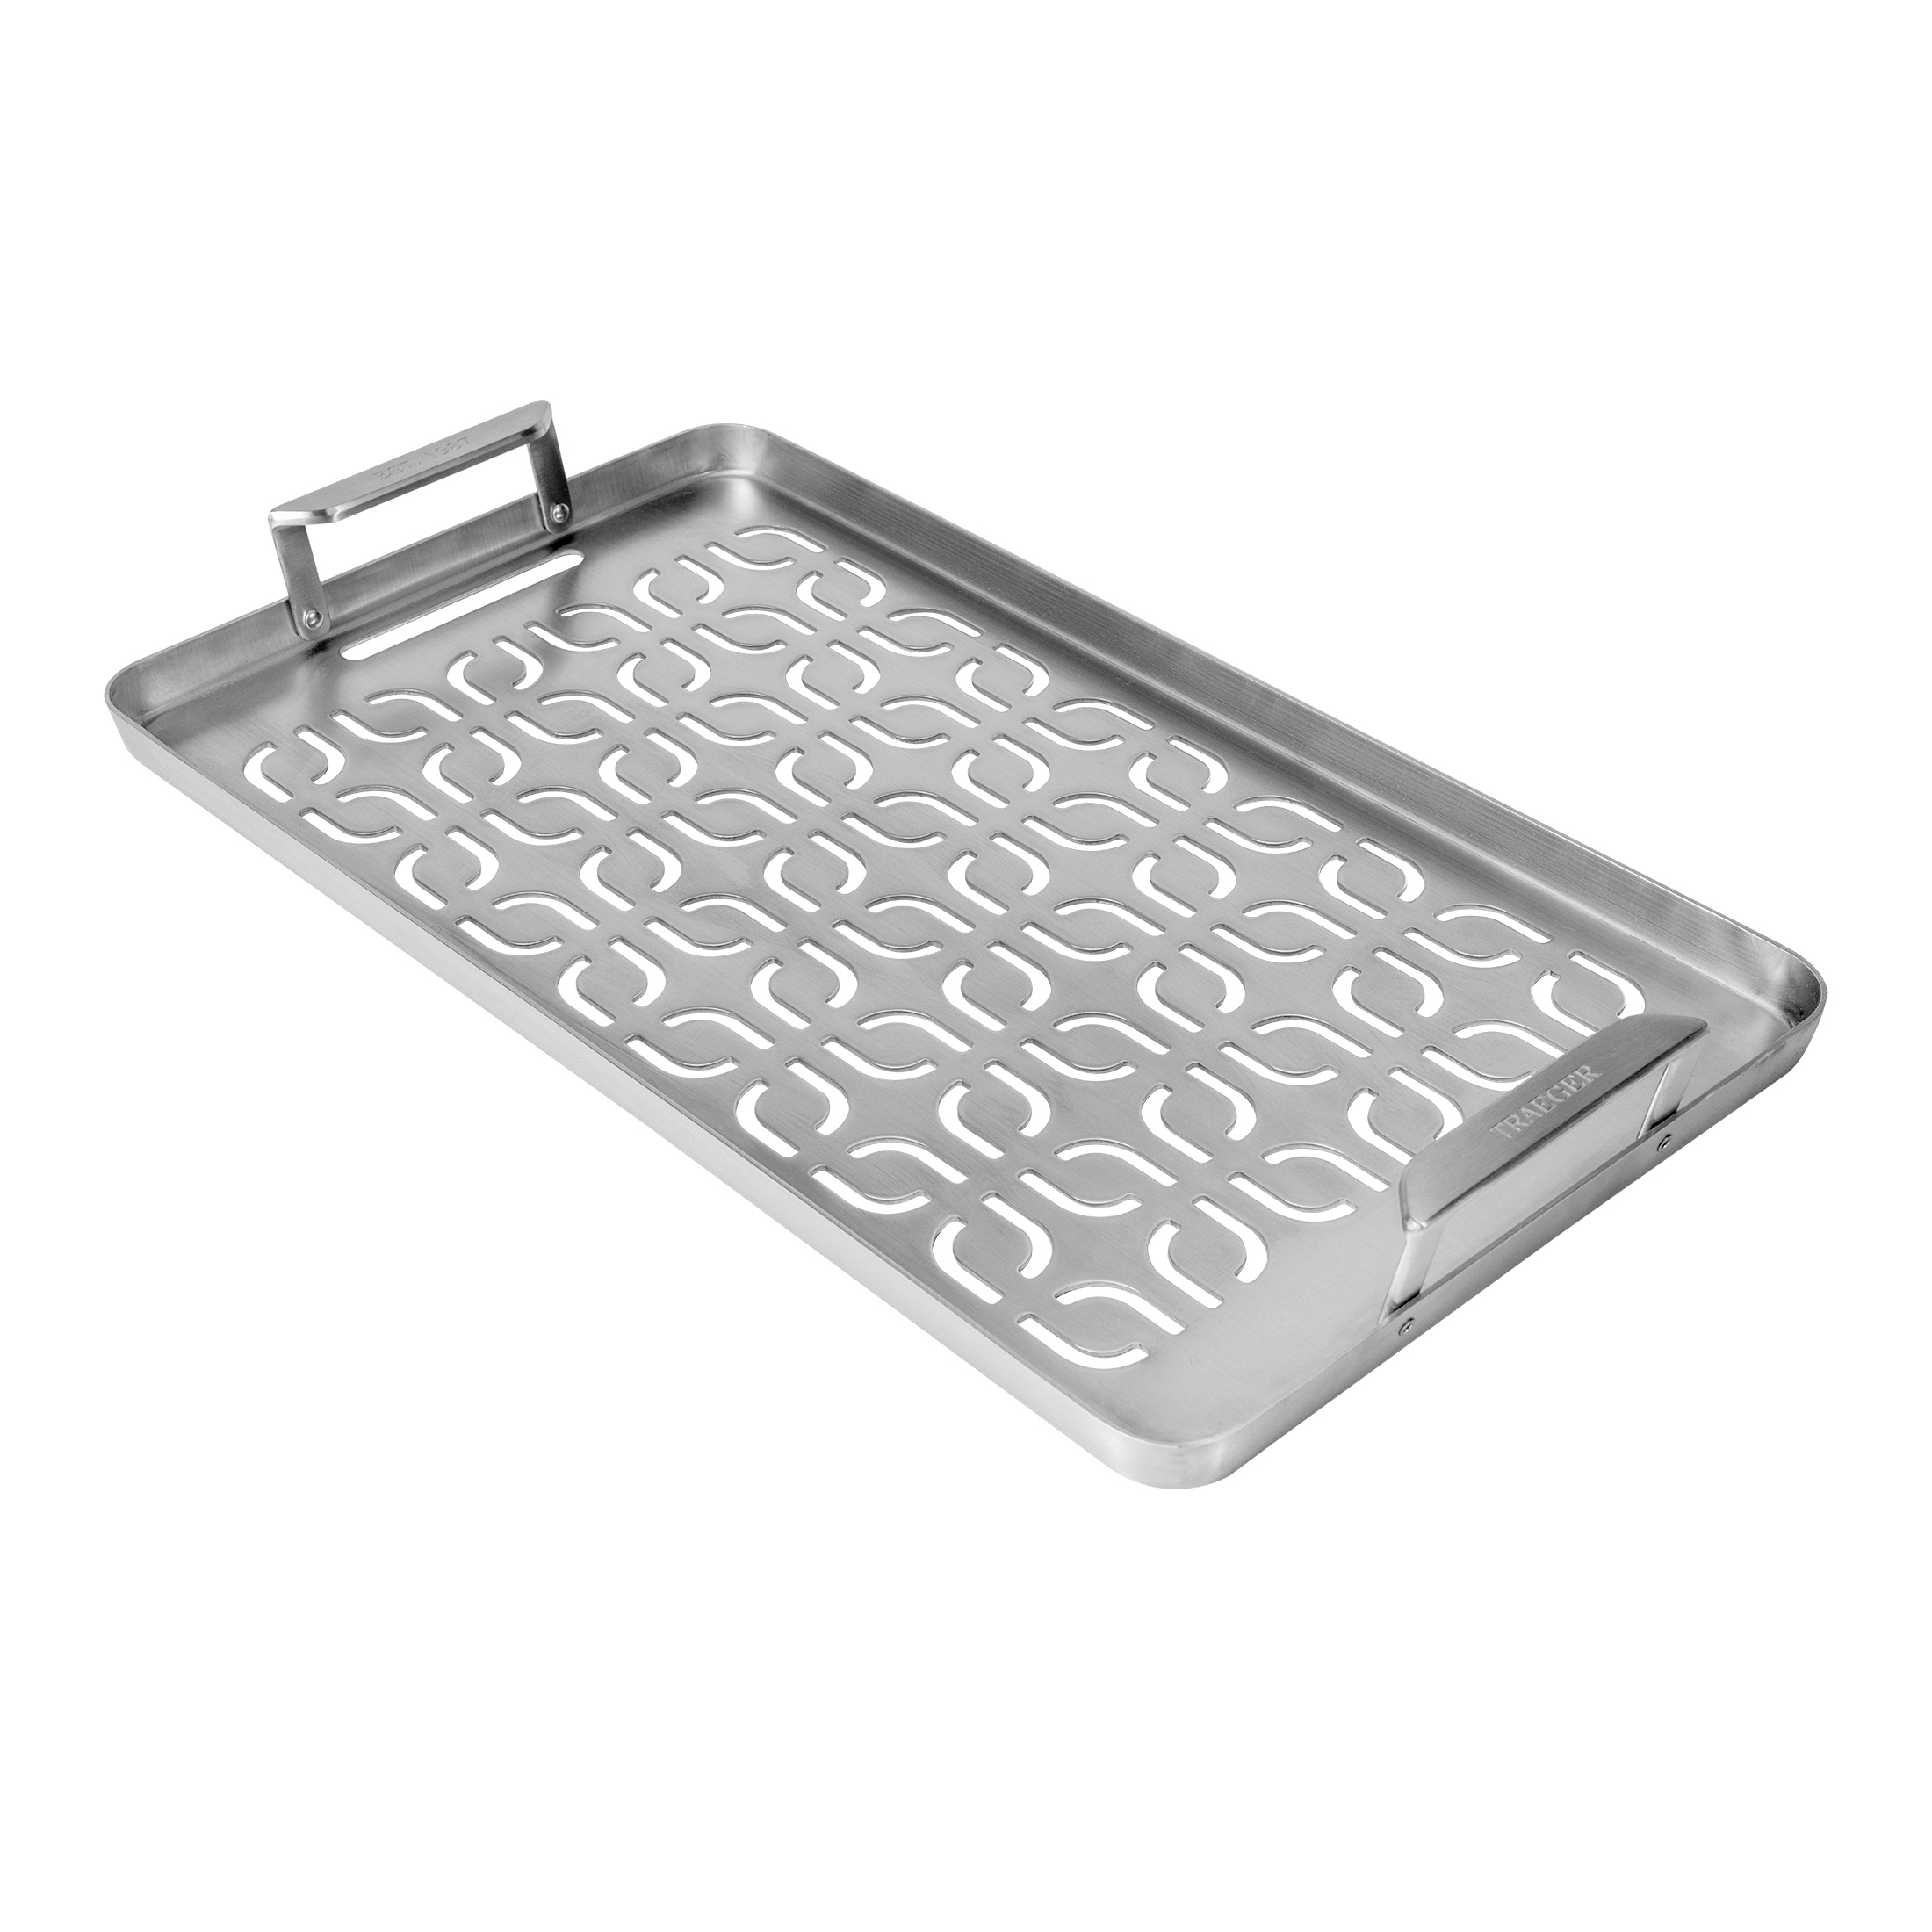 ModiFIRE BAC610 Grill Tray, Stainless Steel, For: ModiFIRE Traeger Grill Grates